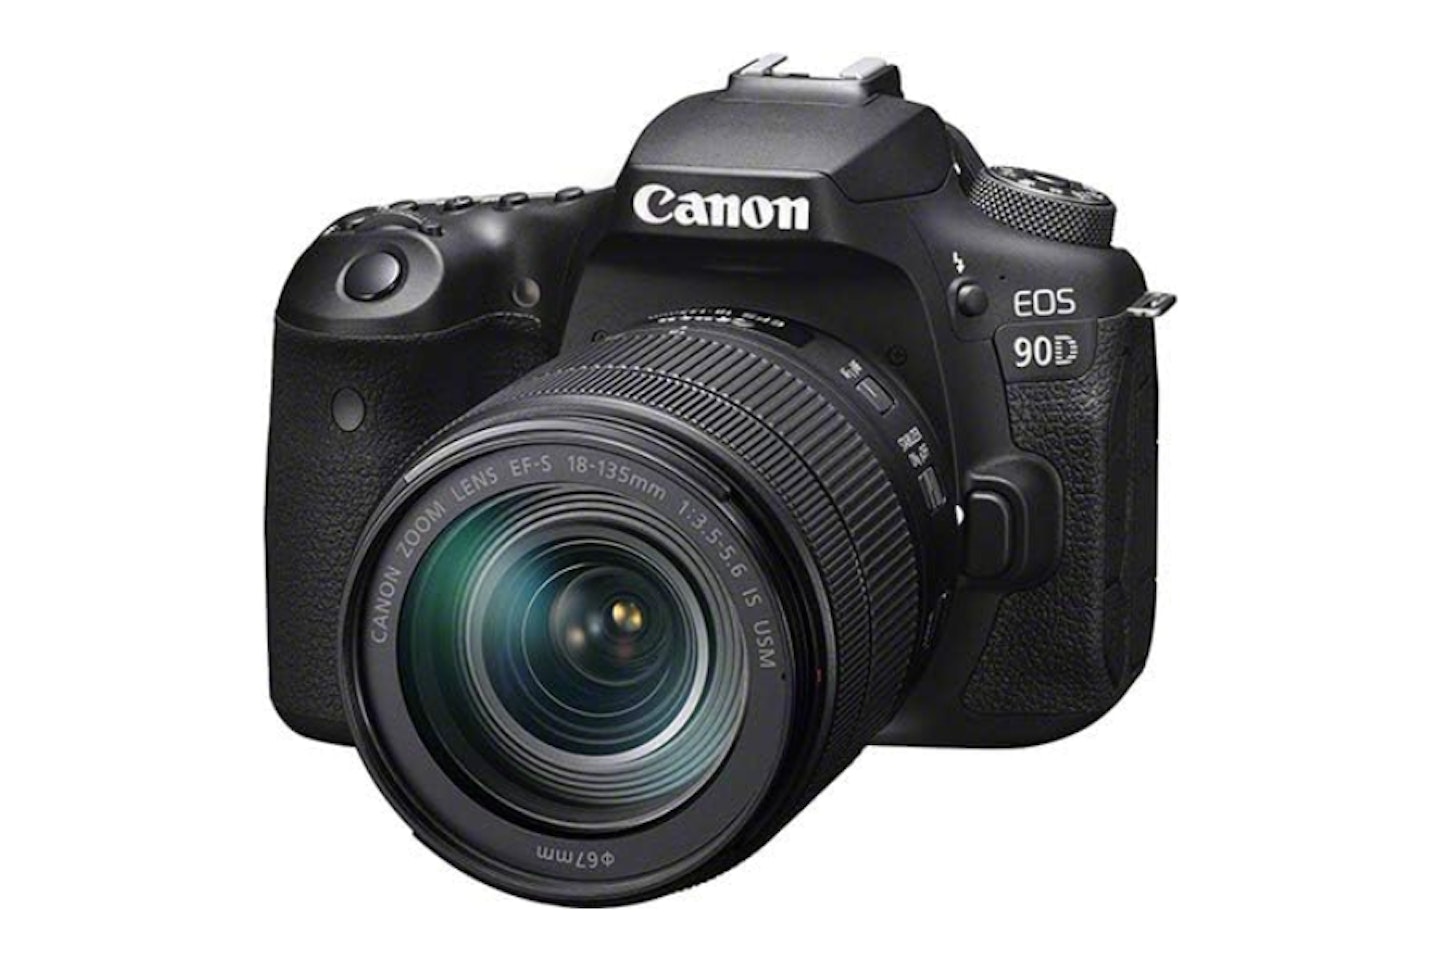 Canon EOS 90D - - one of the best mirrorless camerasLR cameras